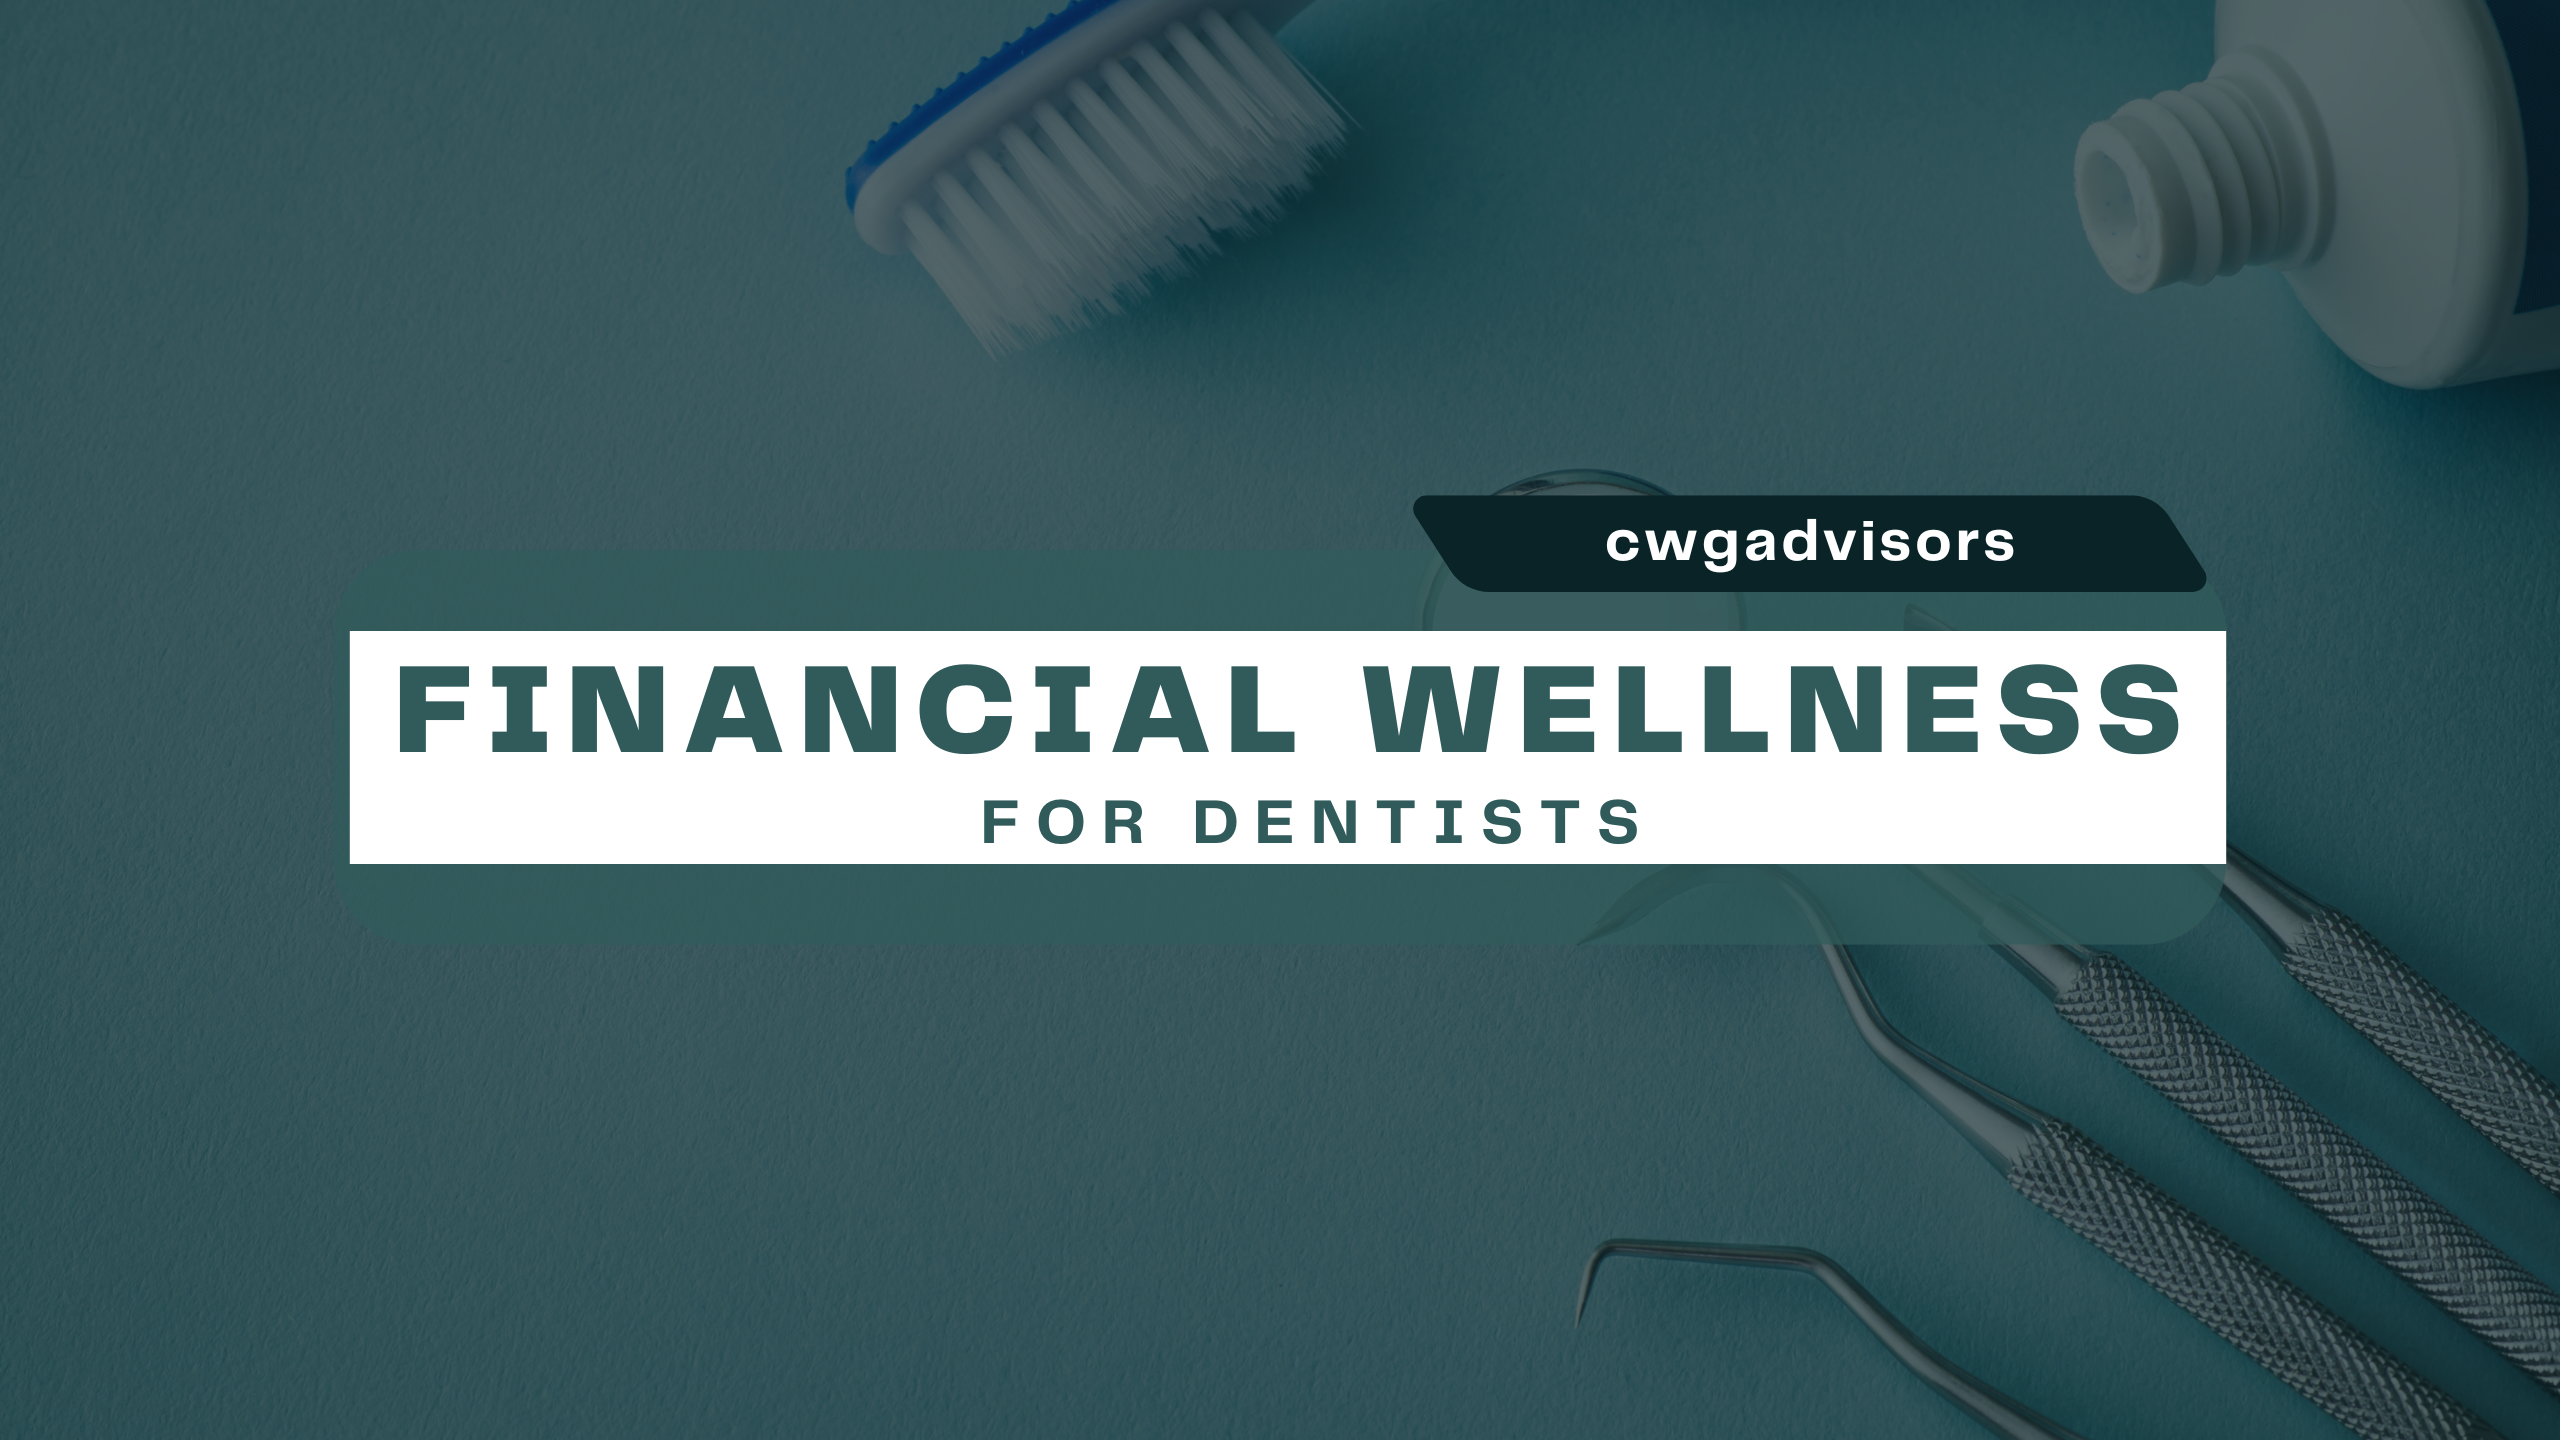 Financial Wellness for Dentists: Optimizing Practice 401(k) Plans and Building a Solid Foundation